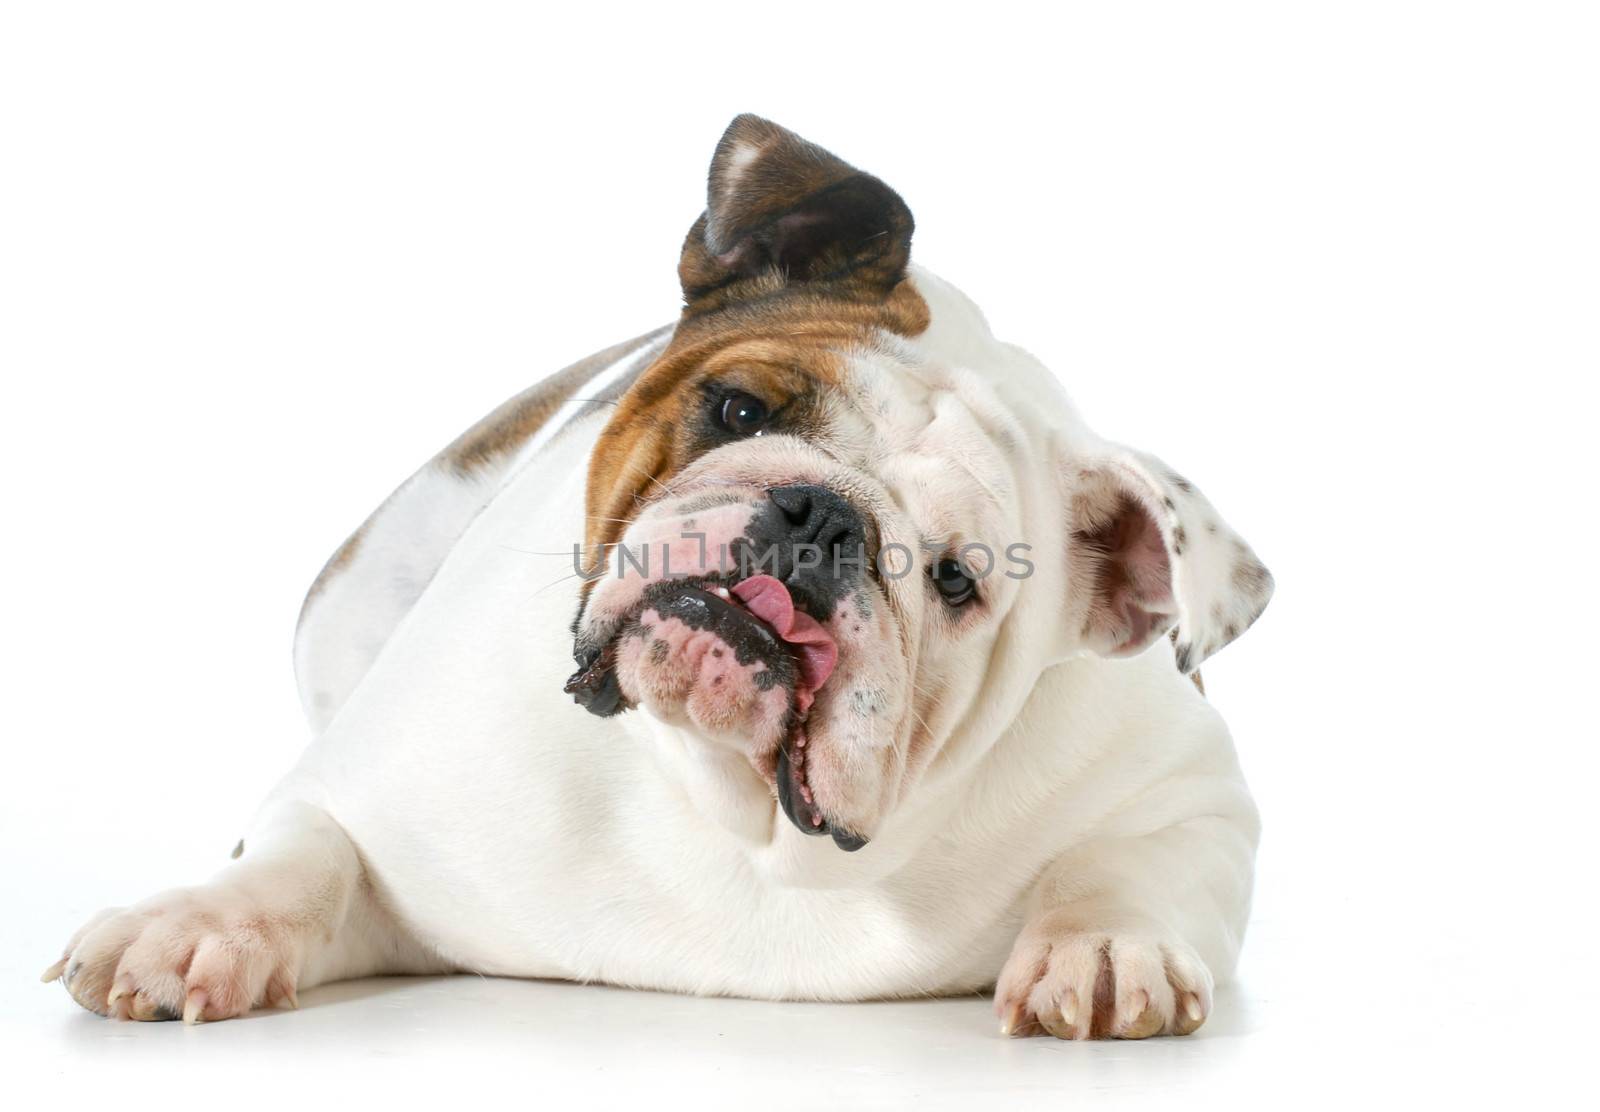 cute dog - english bulldog with silly expression looking at viewer isolated on white background